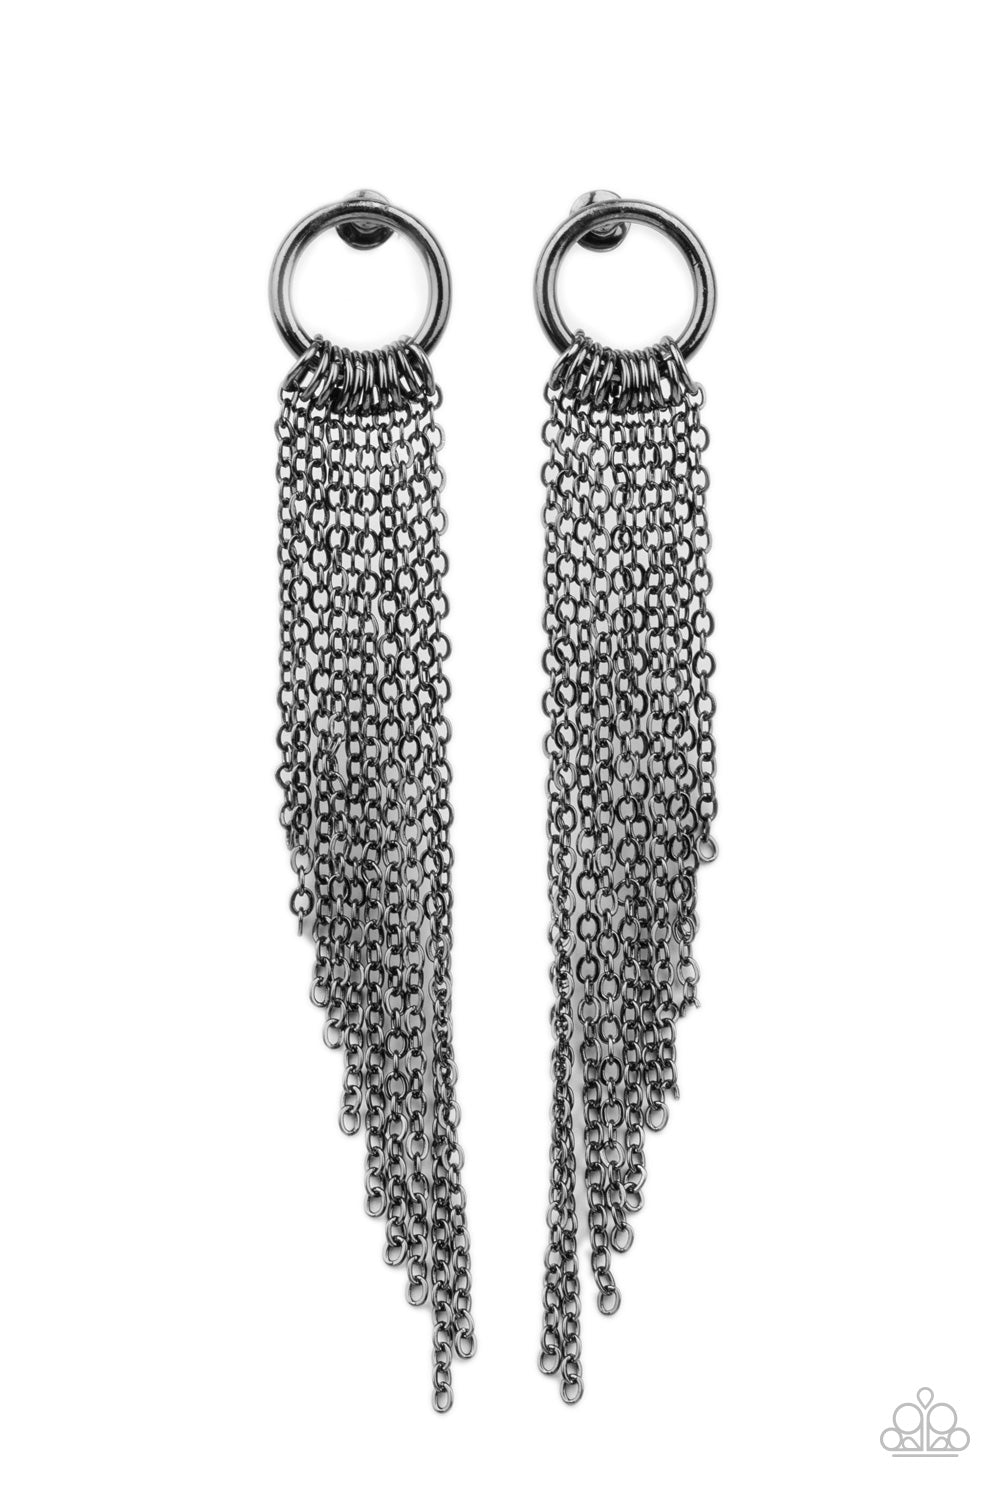 Divinely Dipping Black Earring - Paparazzi Accessories  Tapered gunmetal chains cascade from the bottom of a dainty gunmetal hoop, creating an angled fringe. Earring attaches to a standard post fitting.  All Paparazzi Accessories are lead free and nickel free!  Sold as one pair of post earrings.